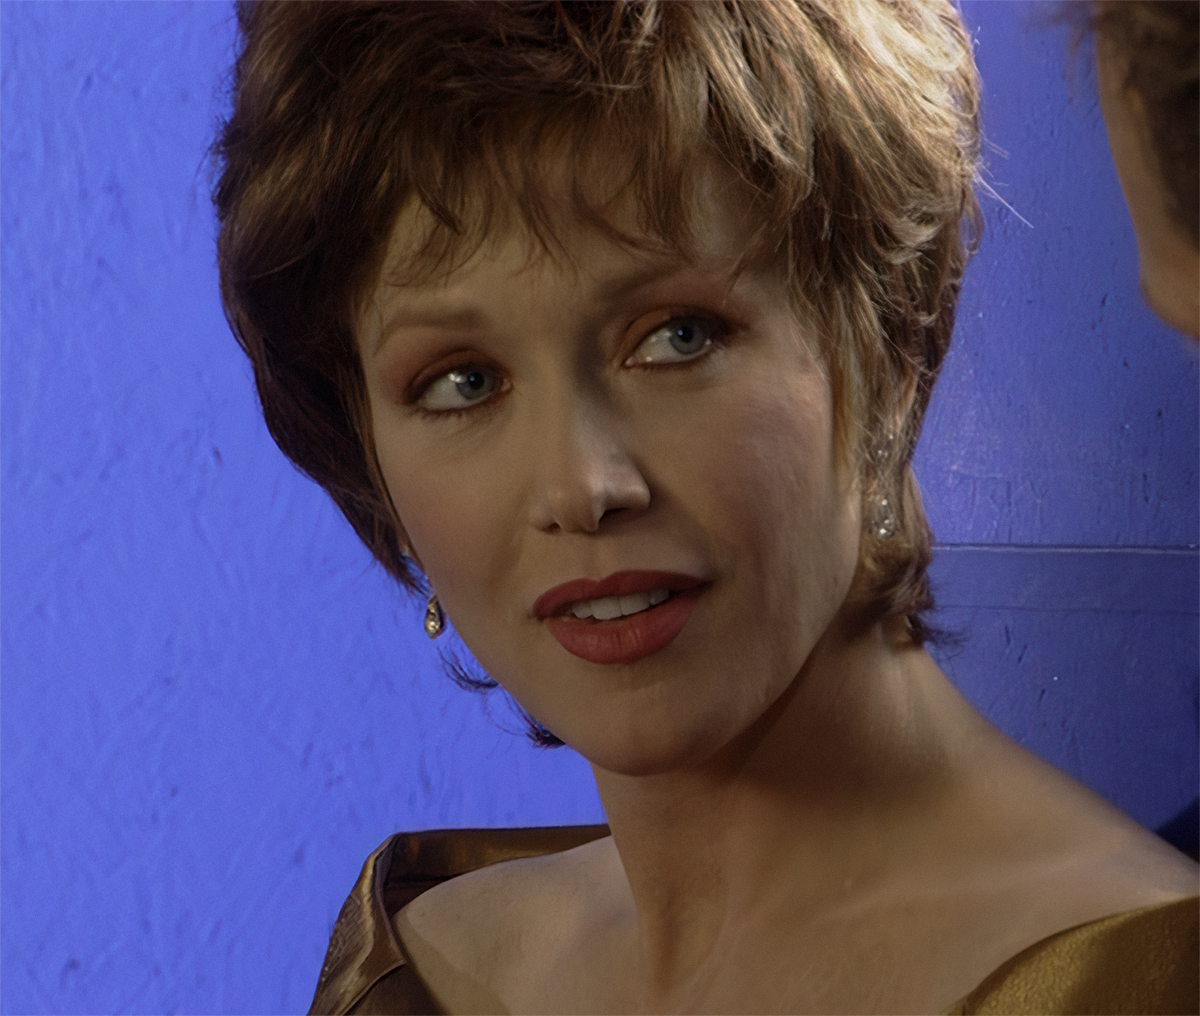 Upscaled image of Tanya Roberts on a blue screen background.